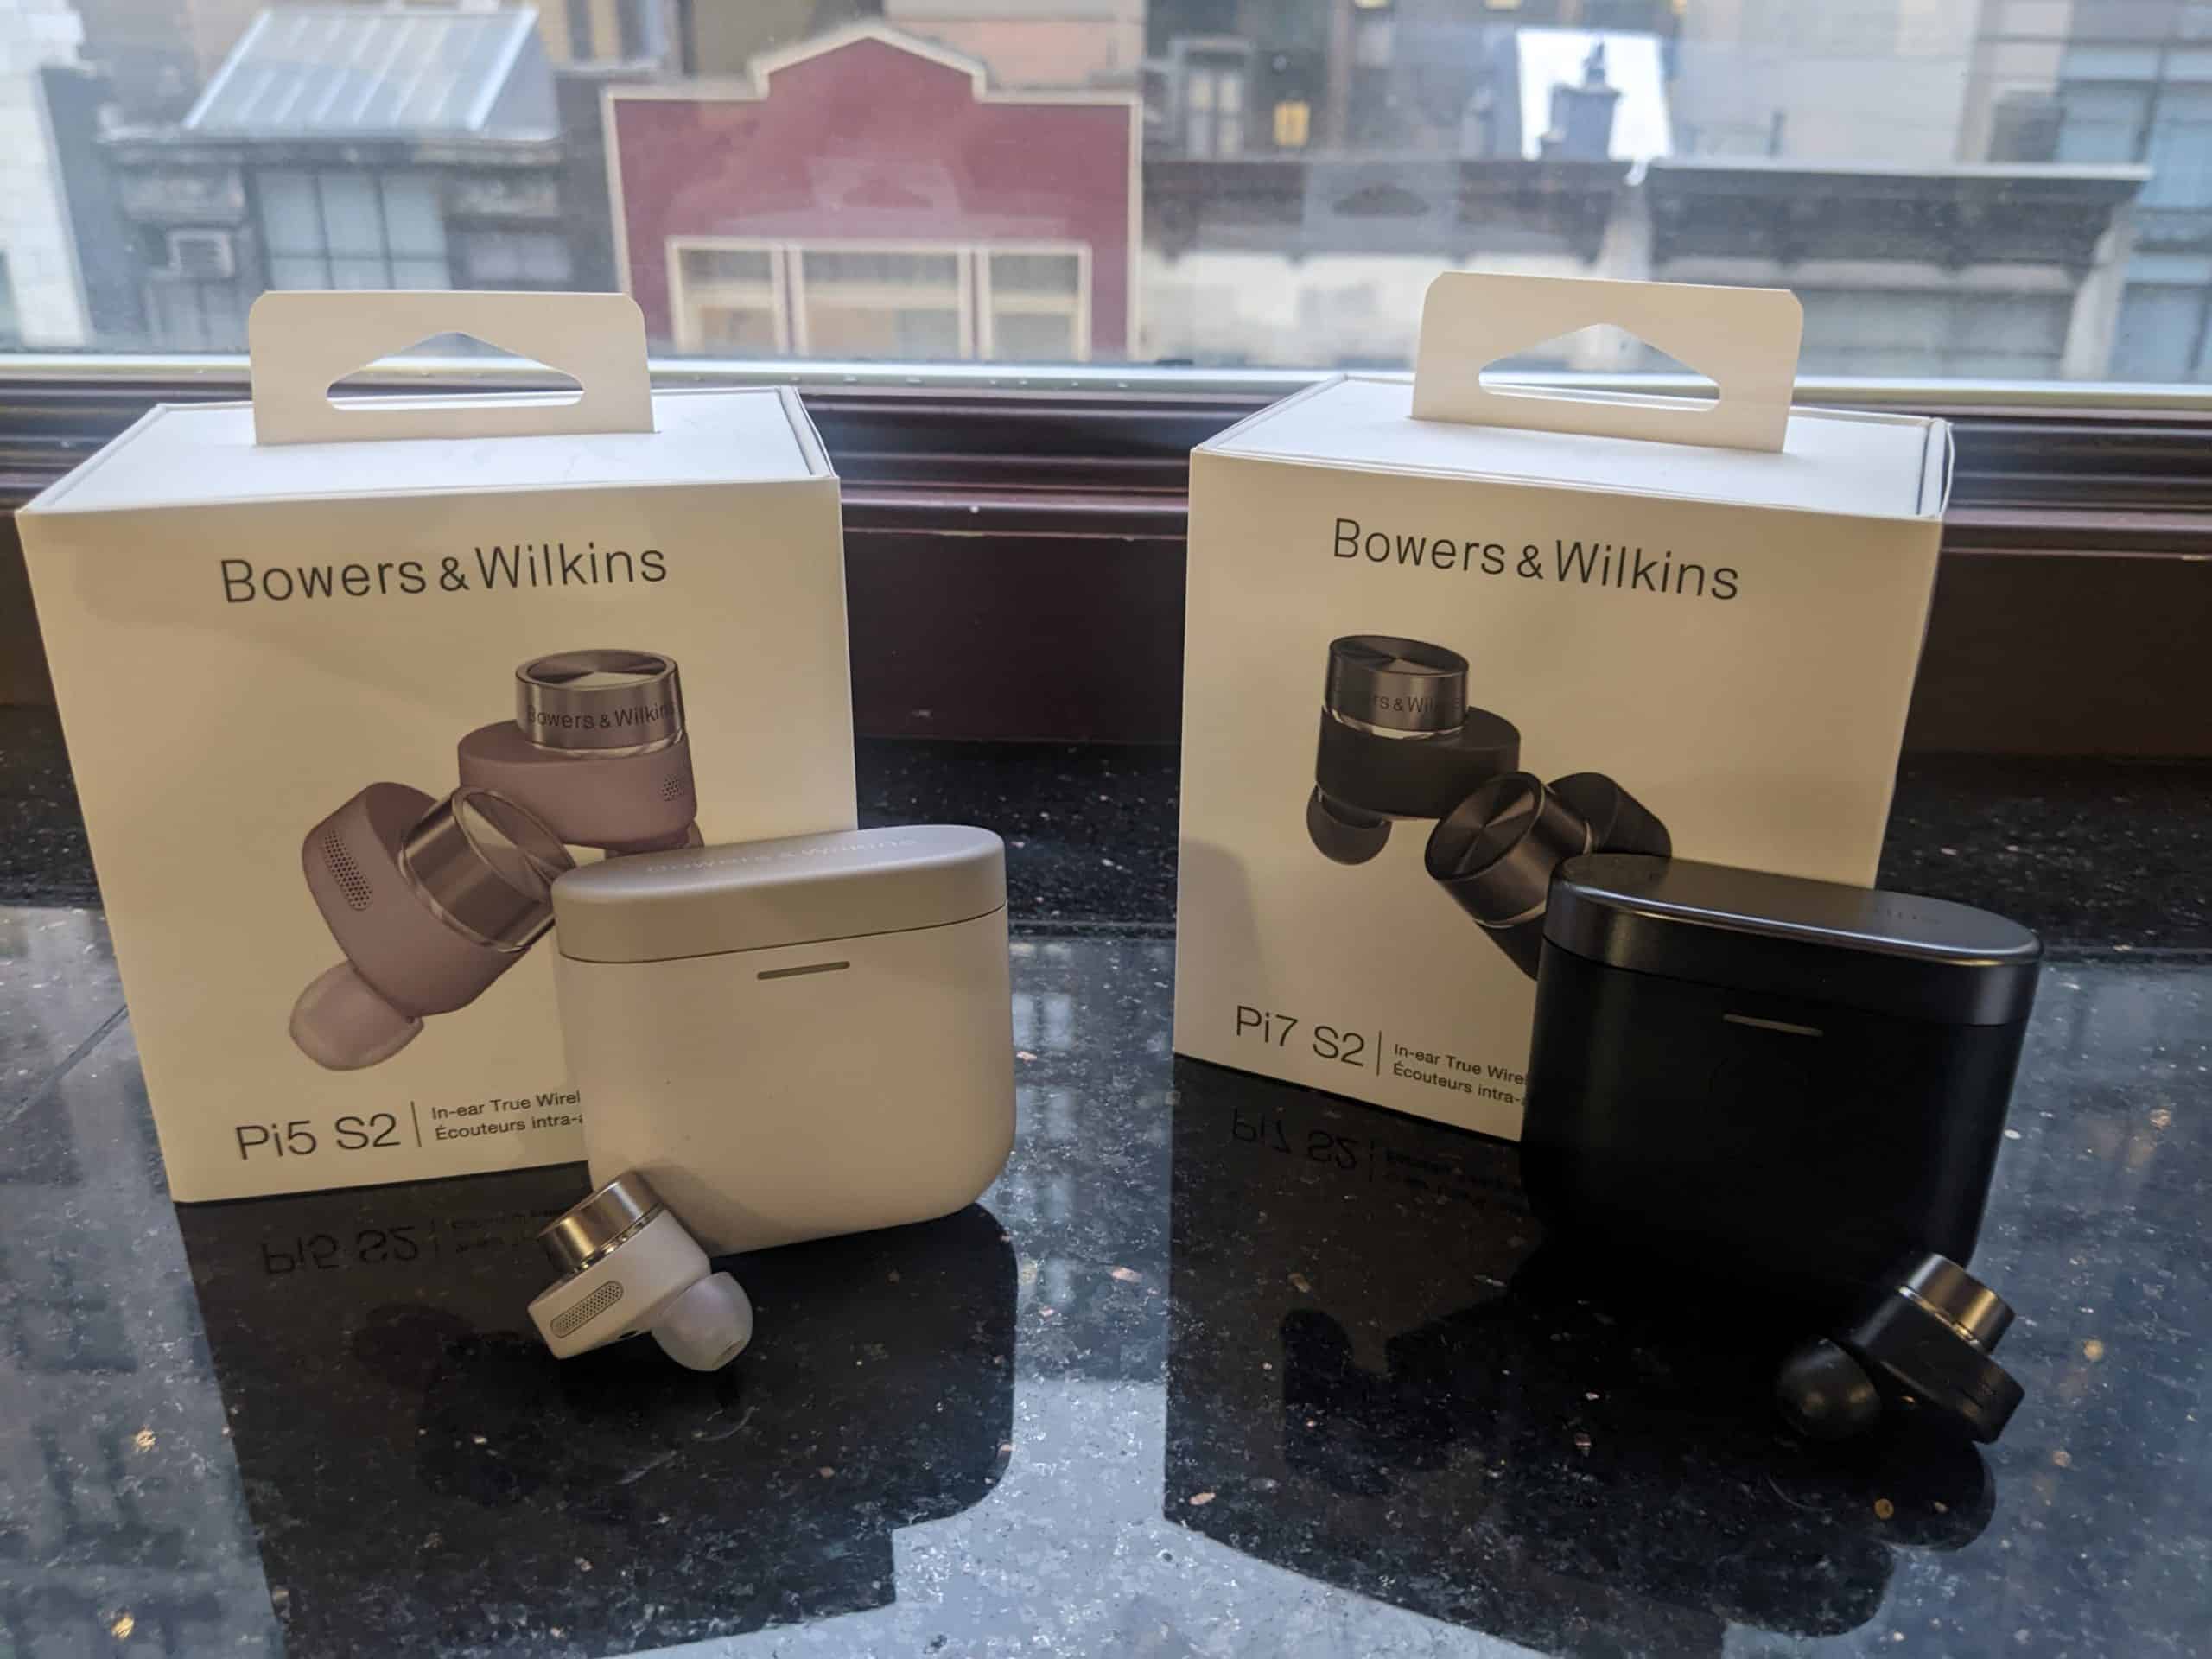 Bowers and Wilkins Wireless Buds